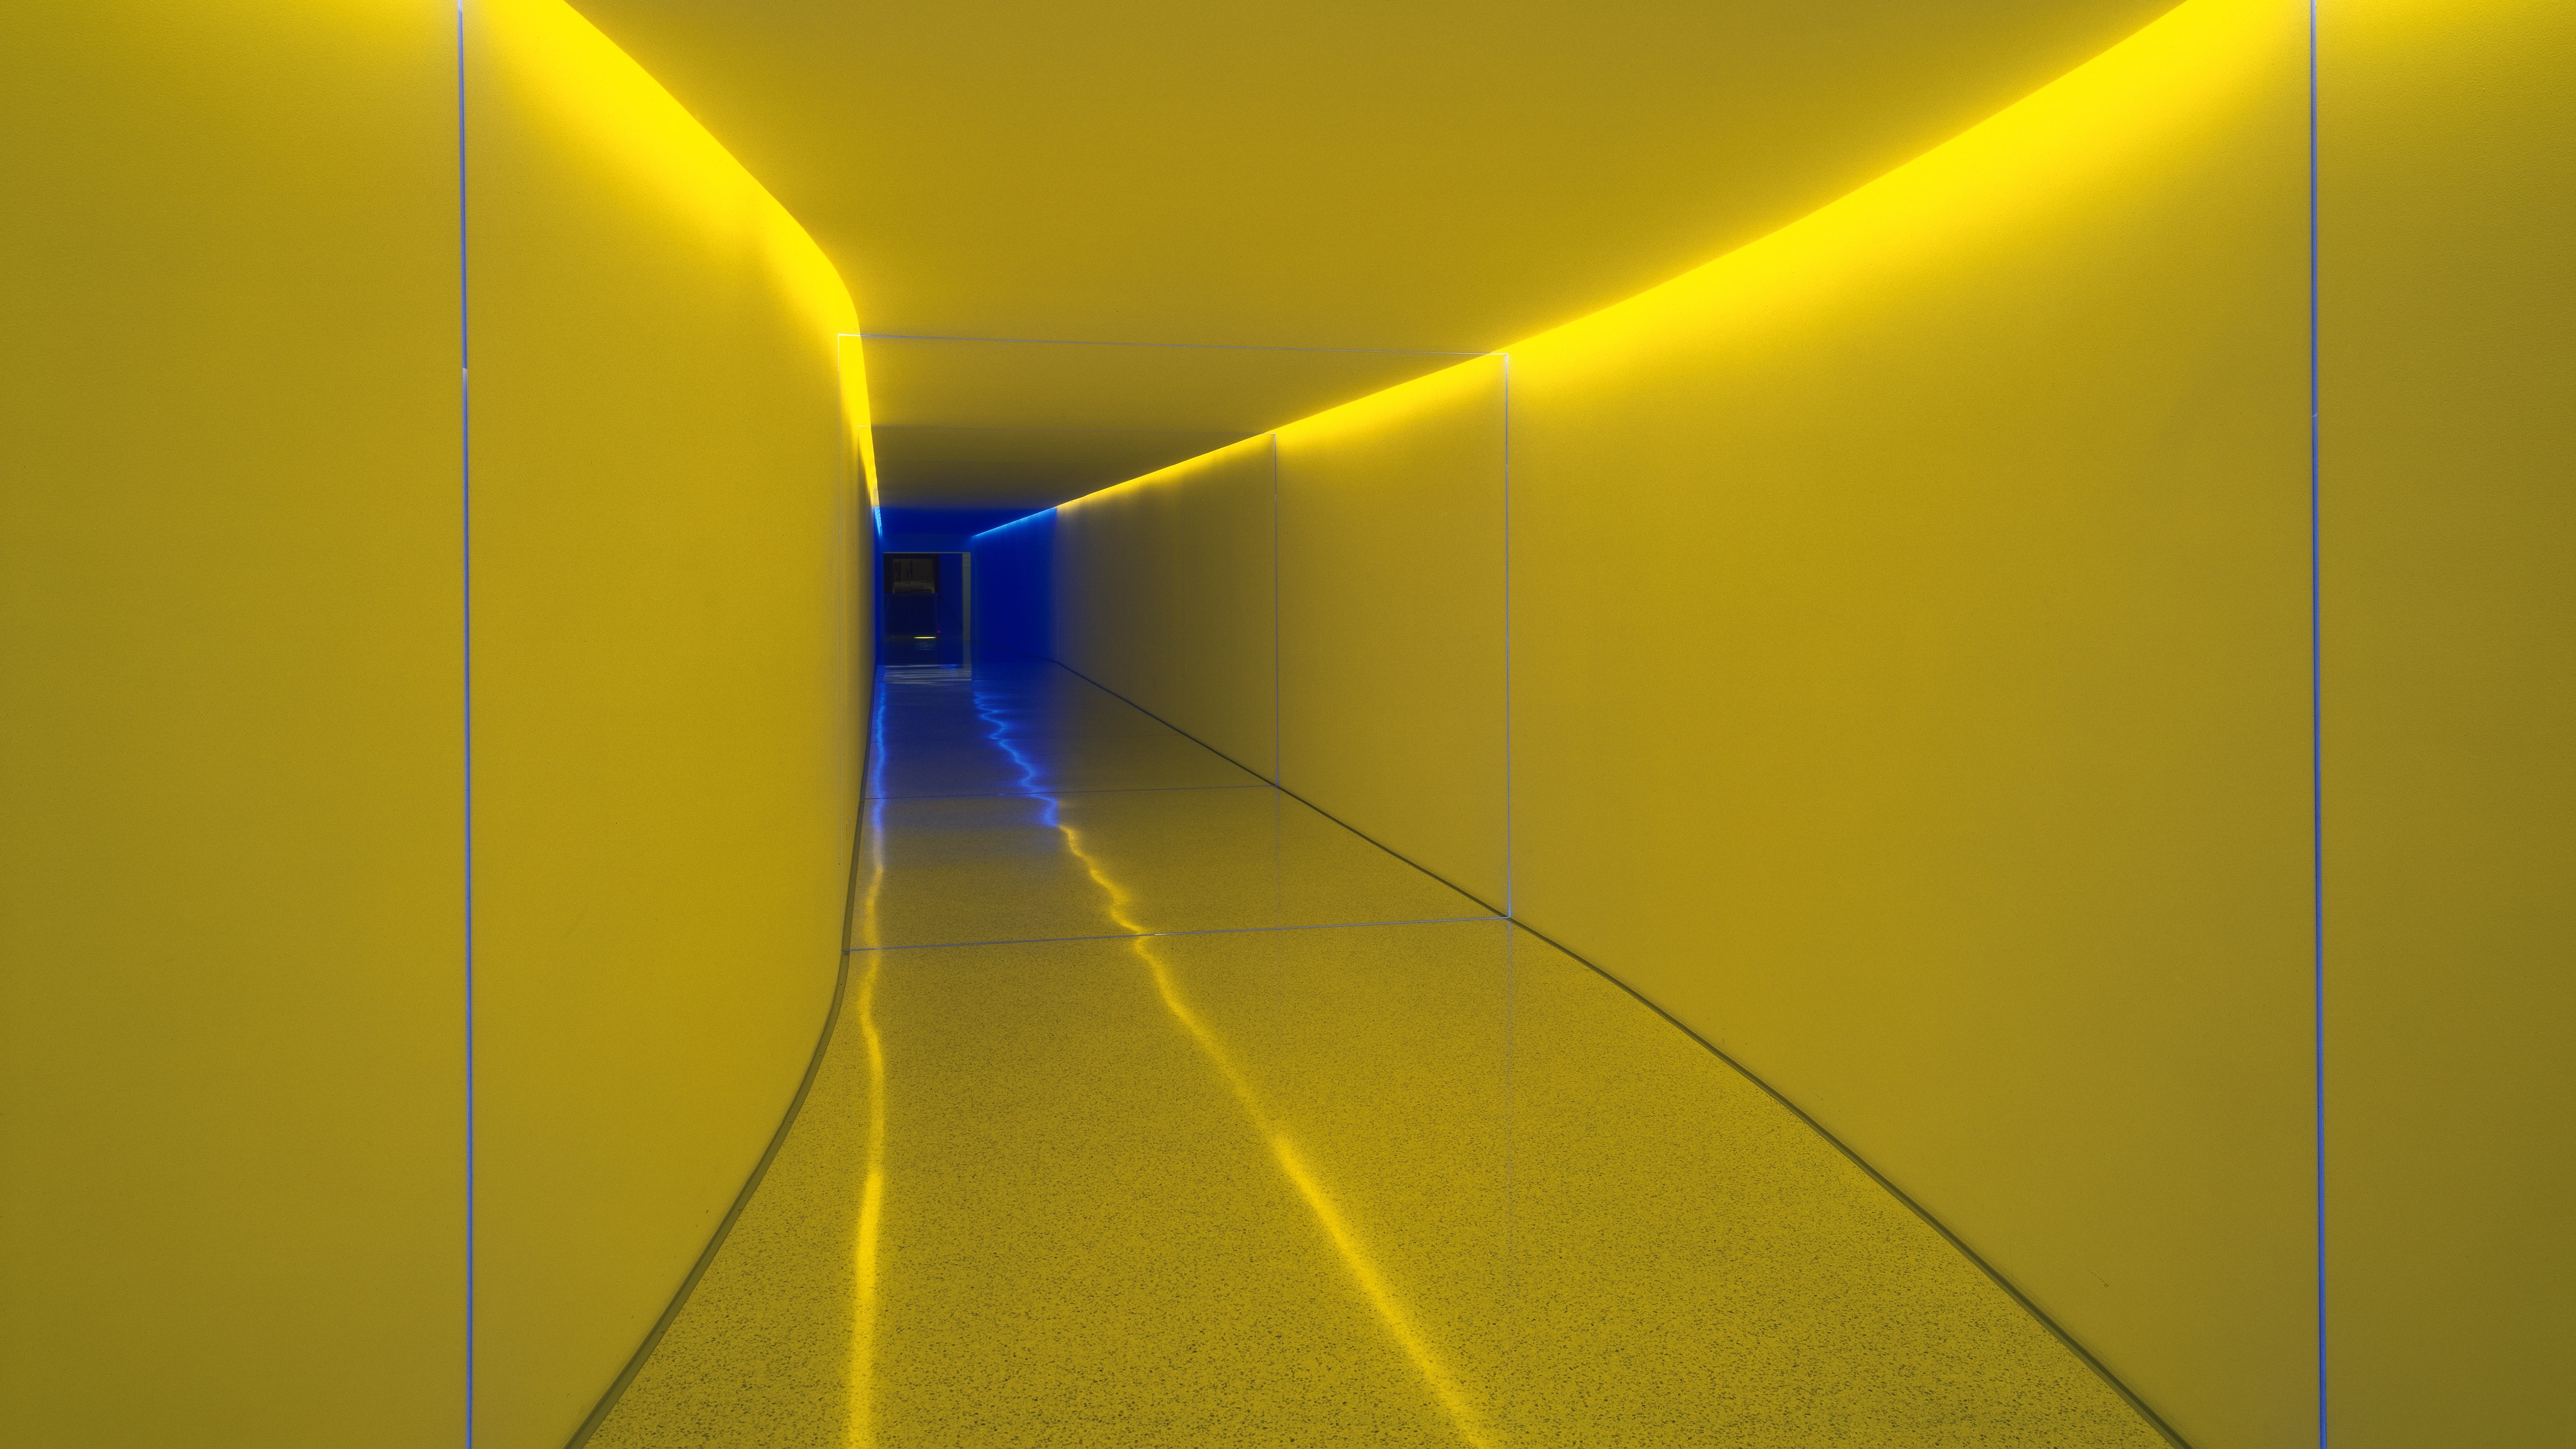 Light Installation "The Inner Way", 1999 by James Turrell